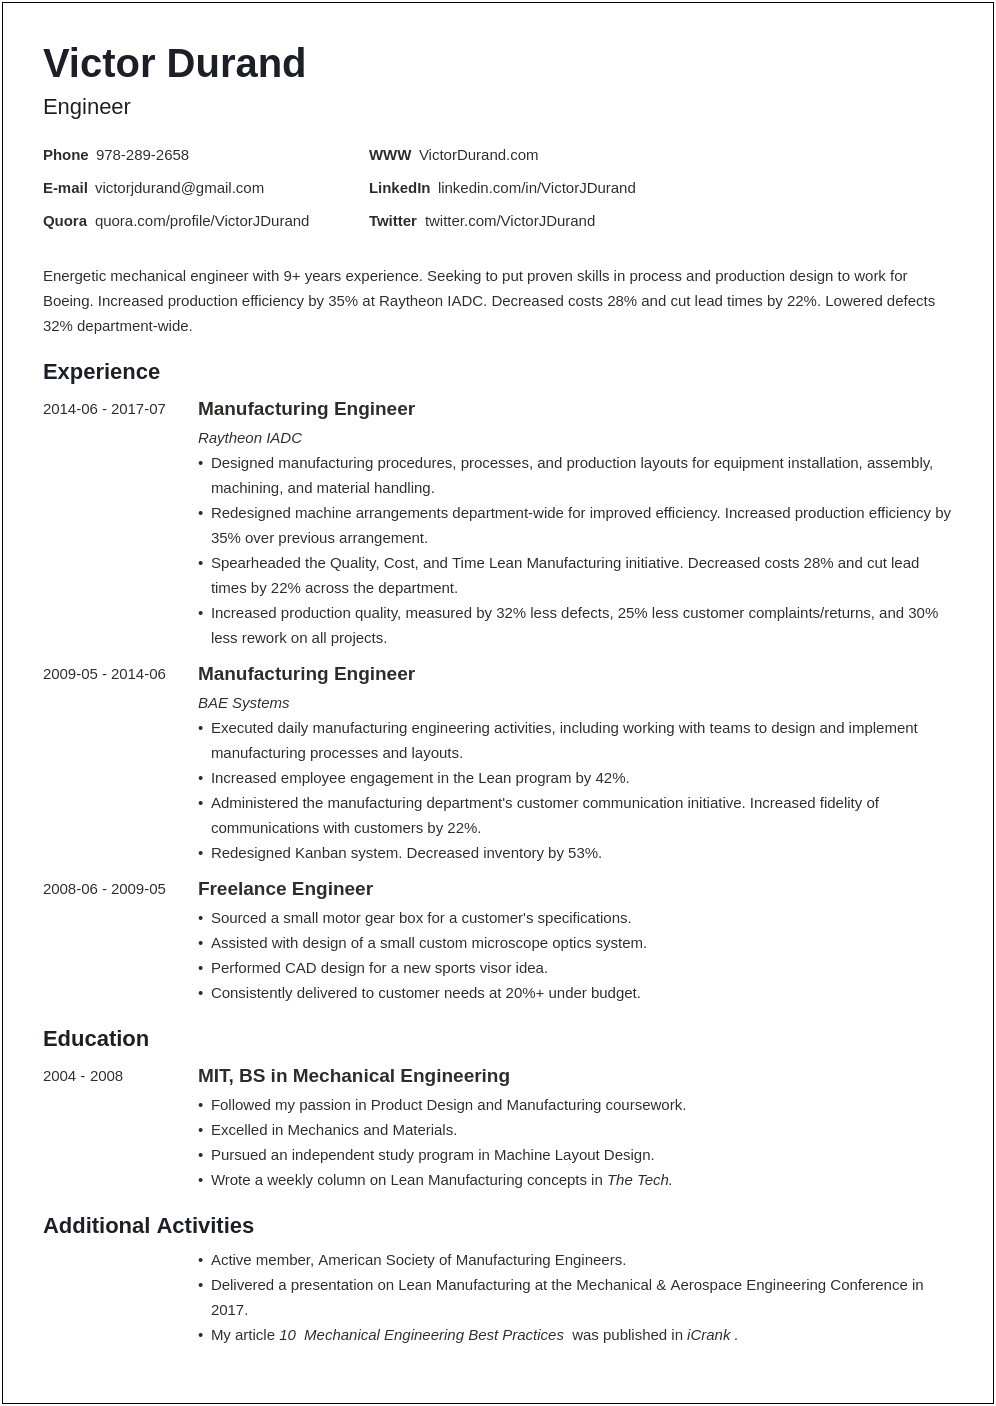 Resume Writing With 5 Years Experience Engineer